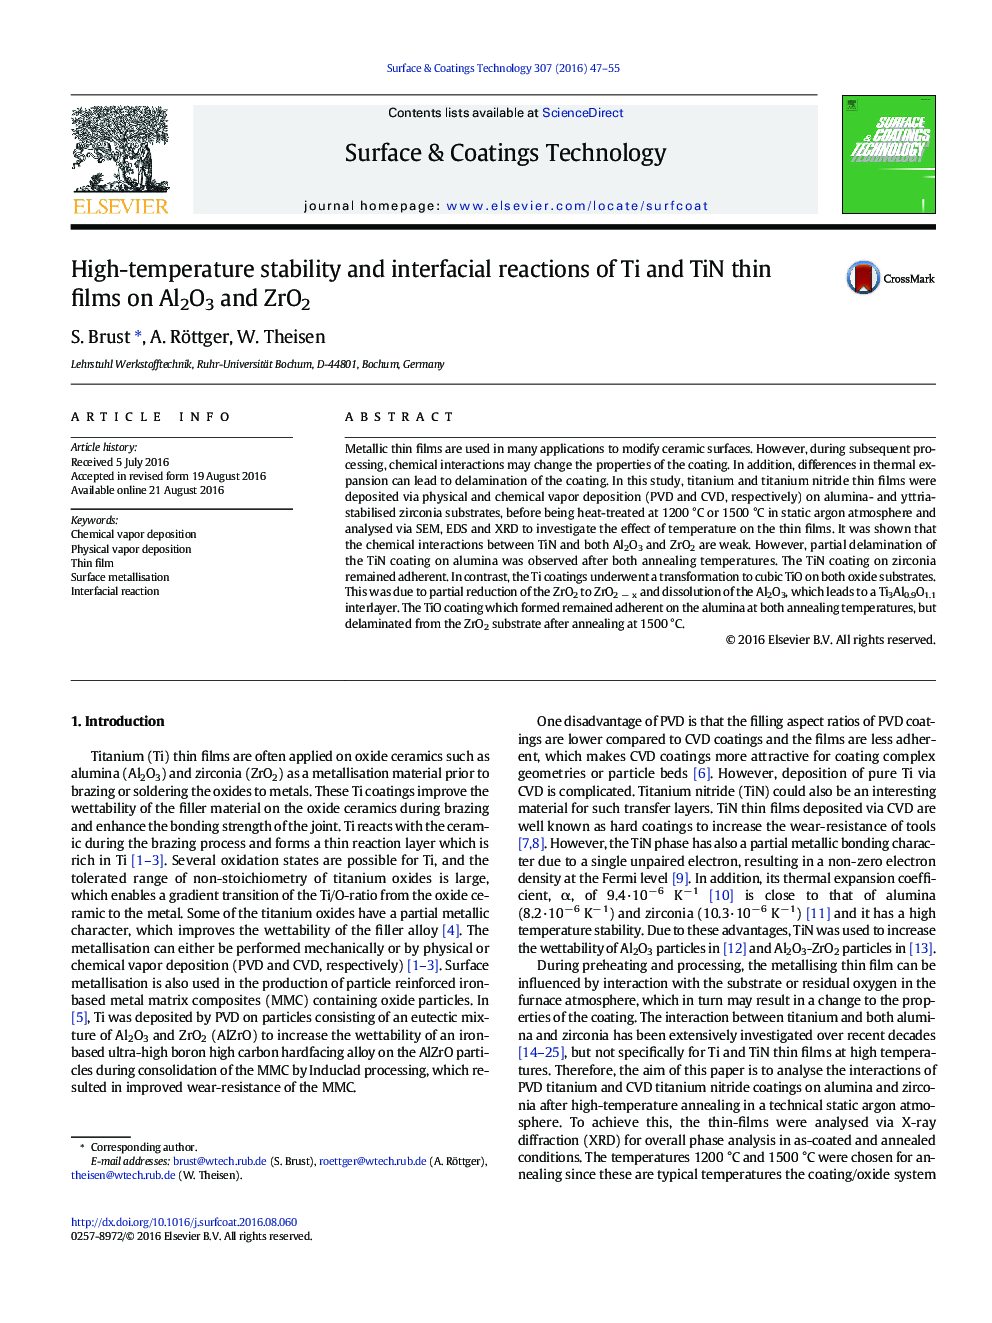 High-temperature stability and interfacial reactions of Ti and TiN thin films on Al2O3 and ZrO2